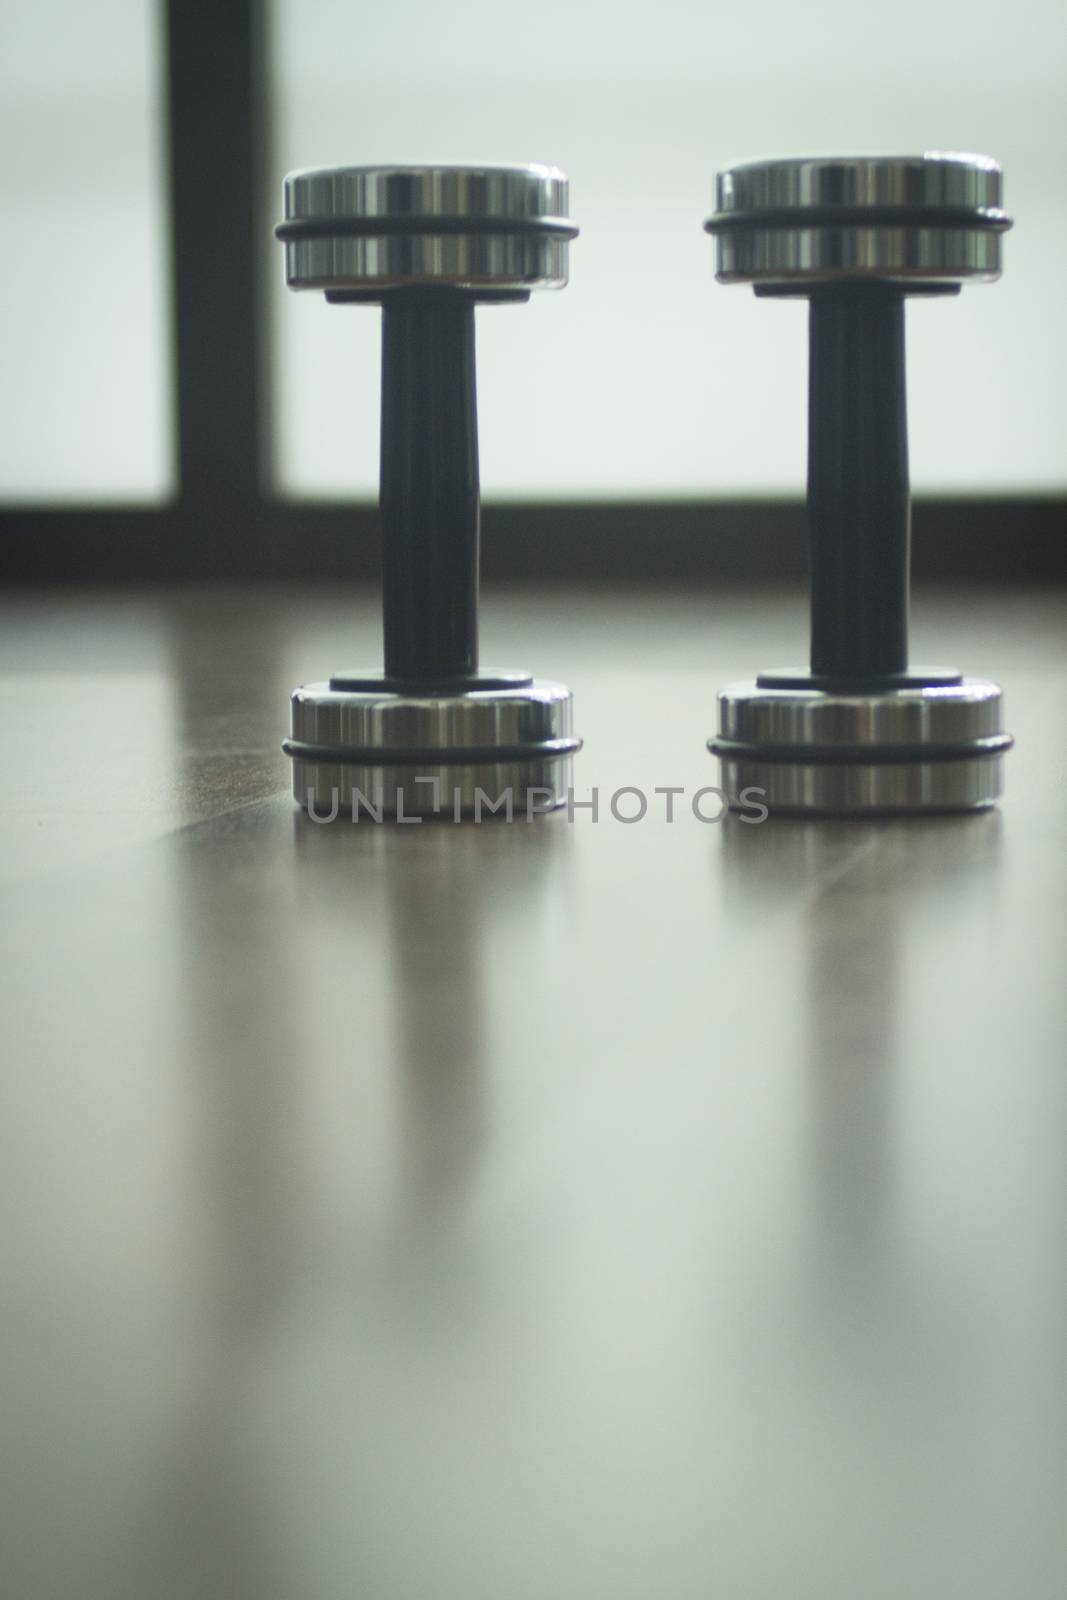 Dumbbell gym metal weights on wooden floor in exercise room in gym health club.